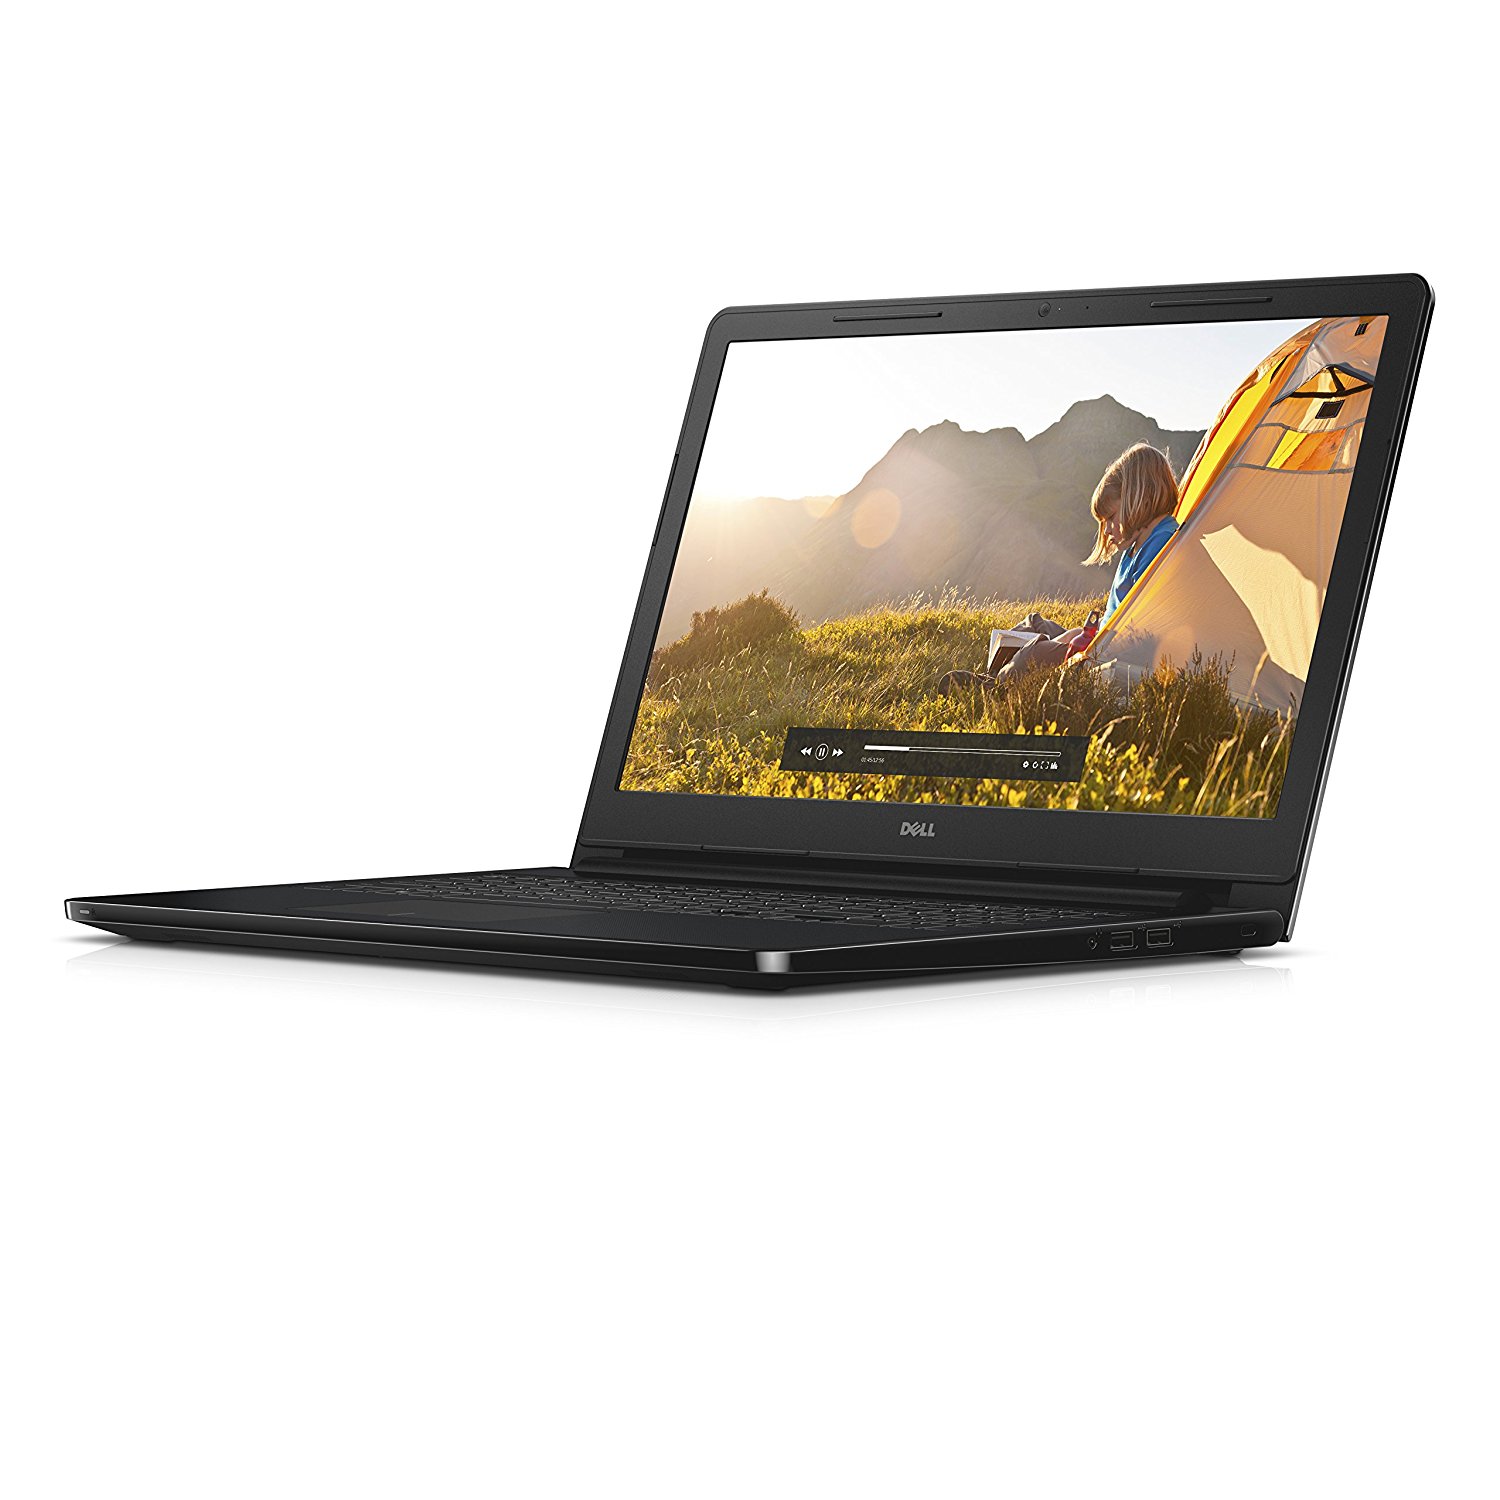 Dell Inspiron 15 3000 Series. Ноутбук dell Inspiron 15 3000 Series. Dell Inspiron 15 i3-5005u. Inspiron 15 3000 Laptop Ryzon. Inspiron 15 3000 series